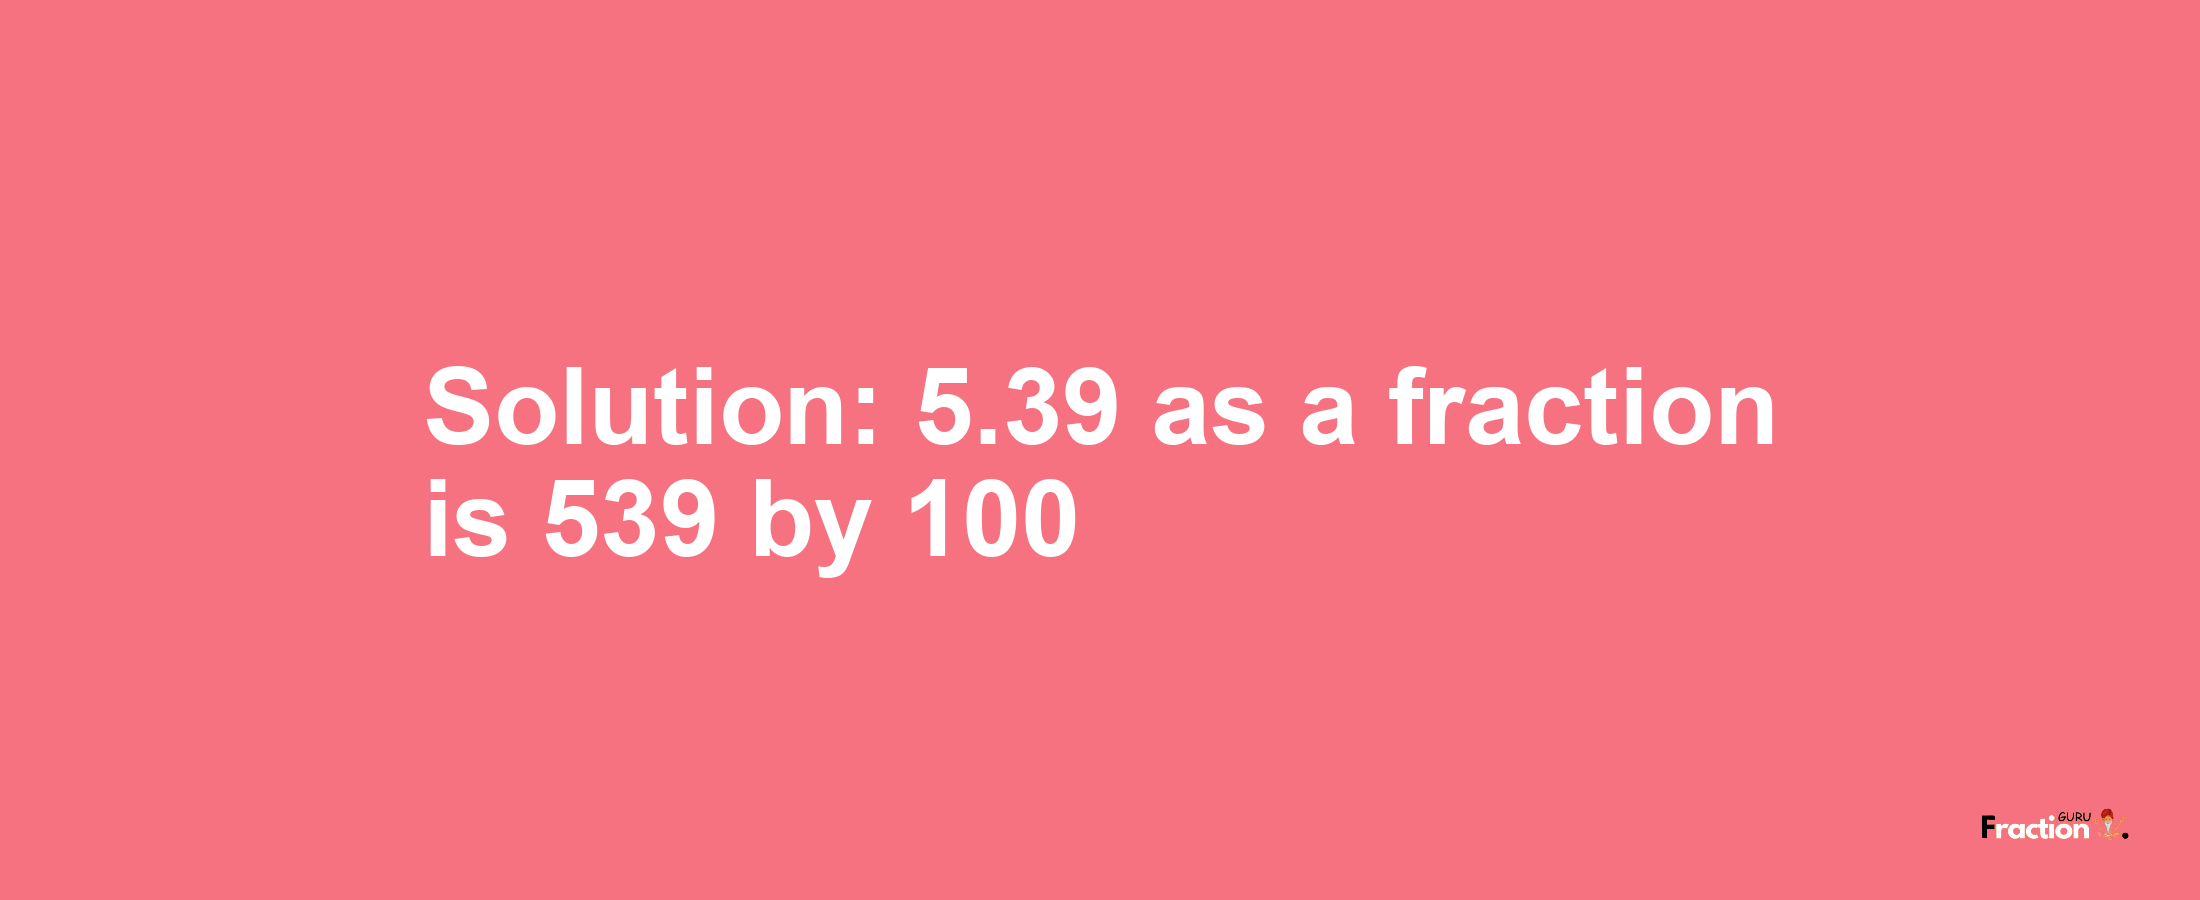 Solution:5.39 as a fraction is 539/100